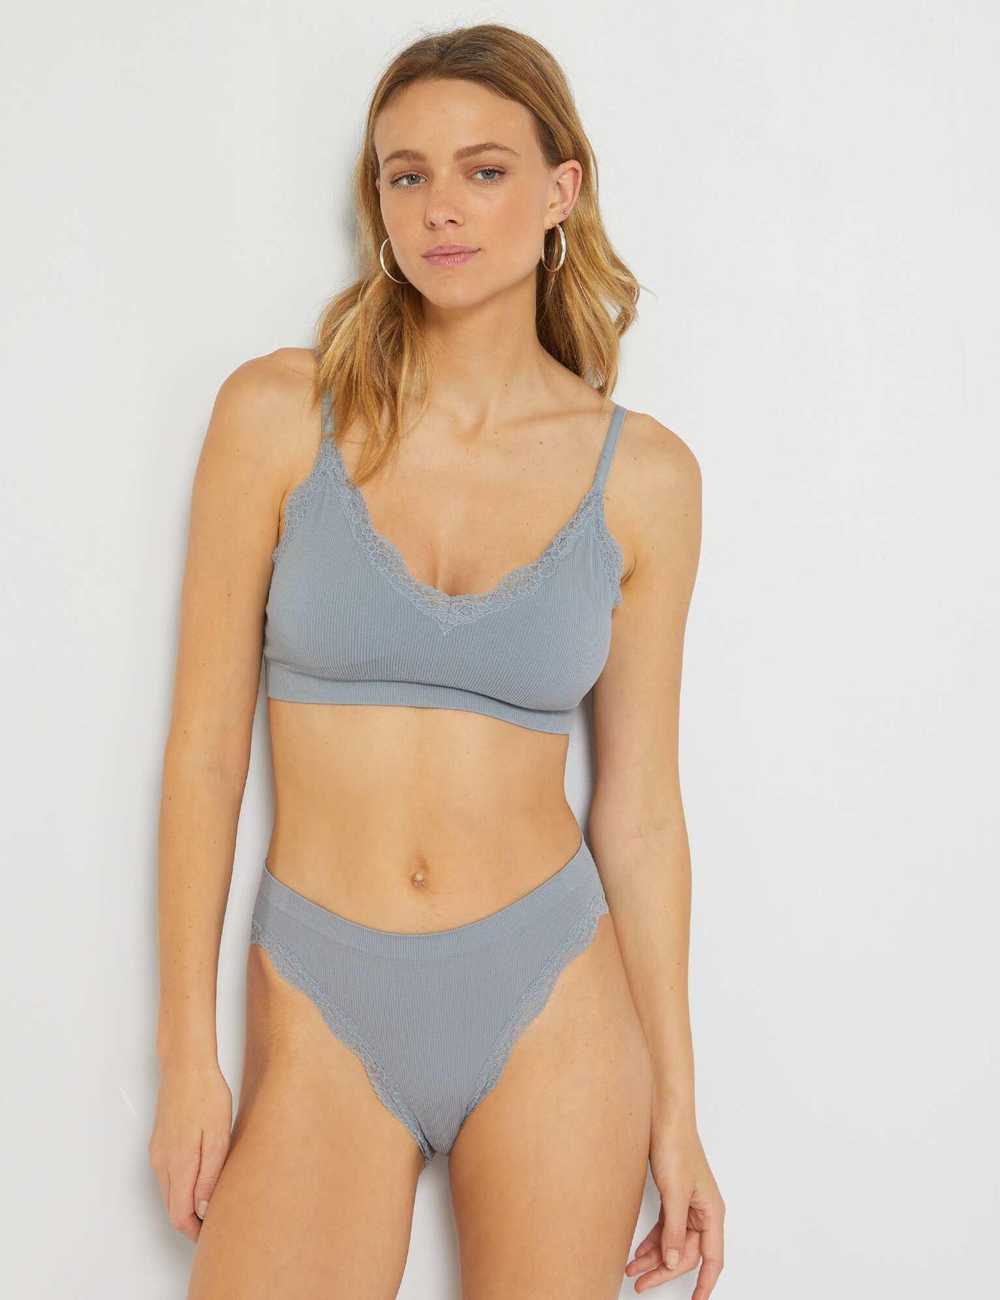 Buy Bralette with removable pads Online in Dubai & the UAE